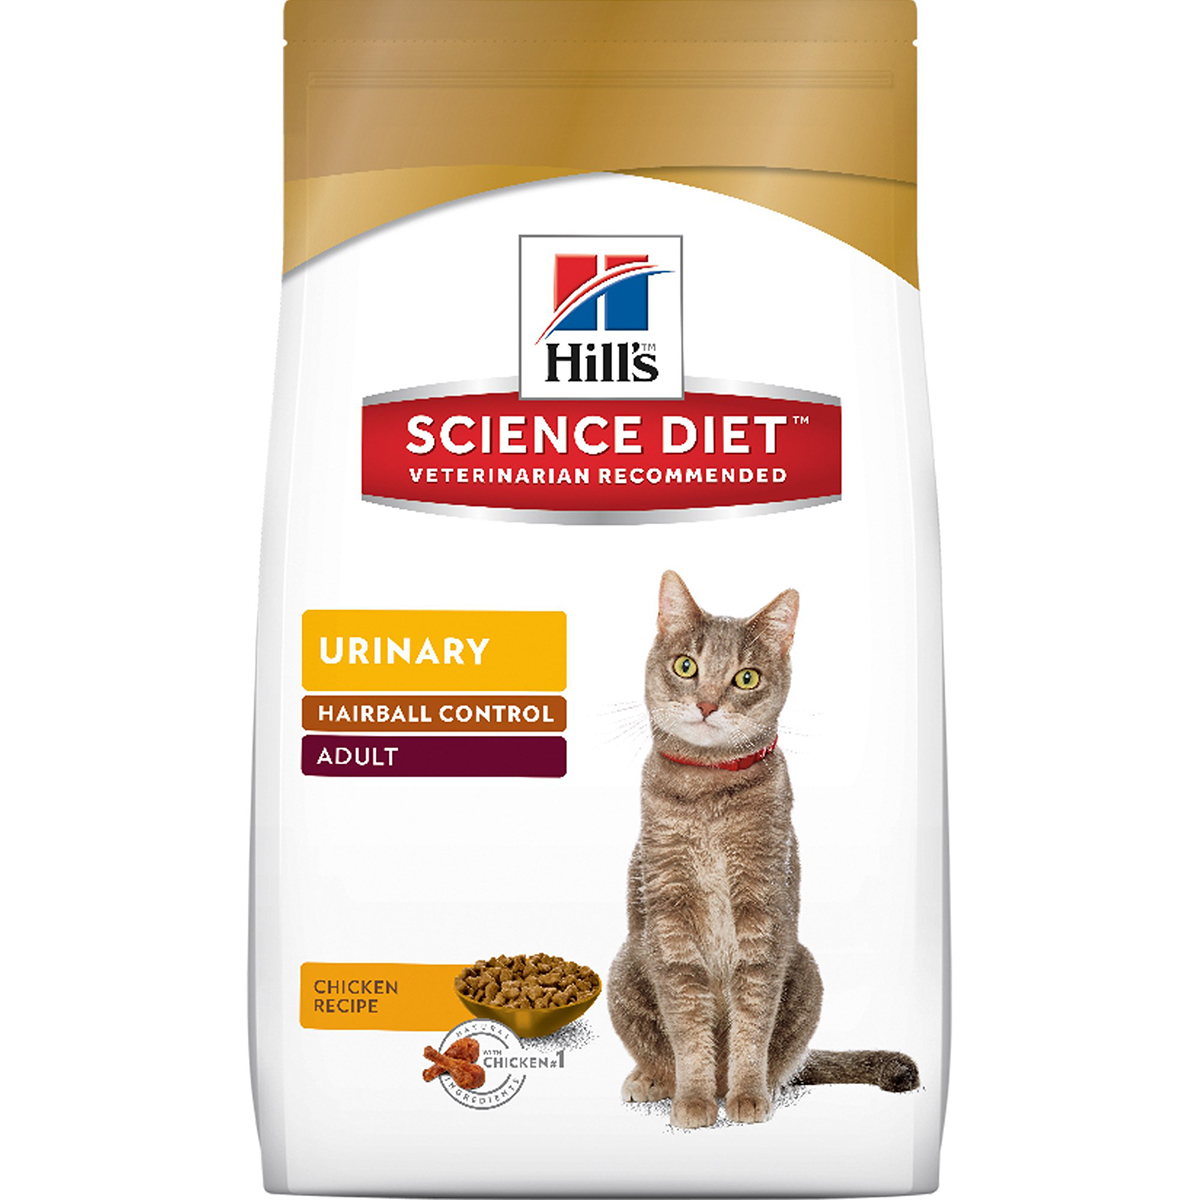 Hill's Science Diet Adult Urinary Hairball Control Cat Food 15.5lbs